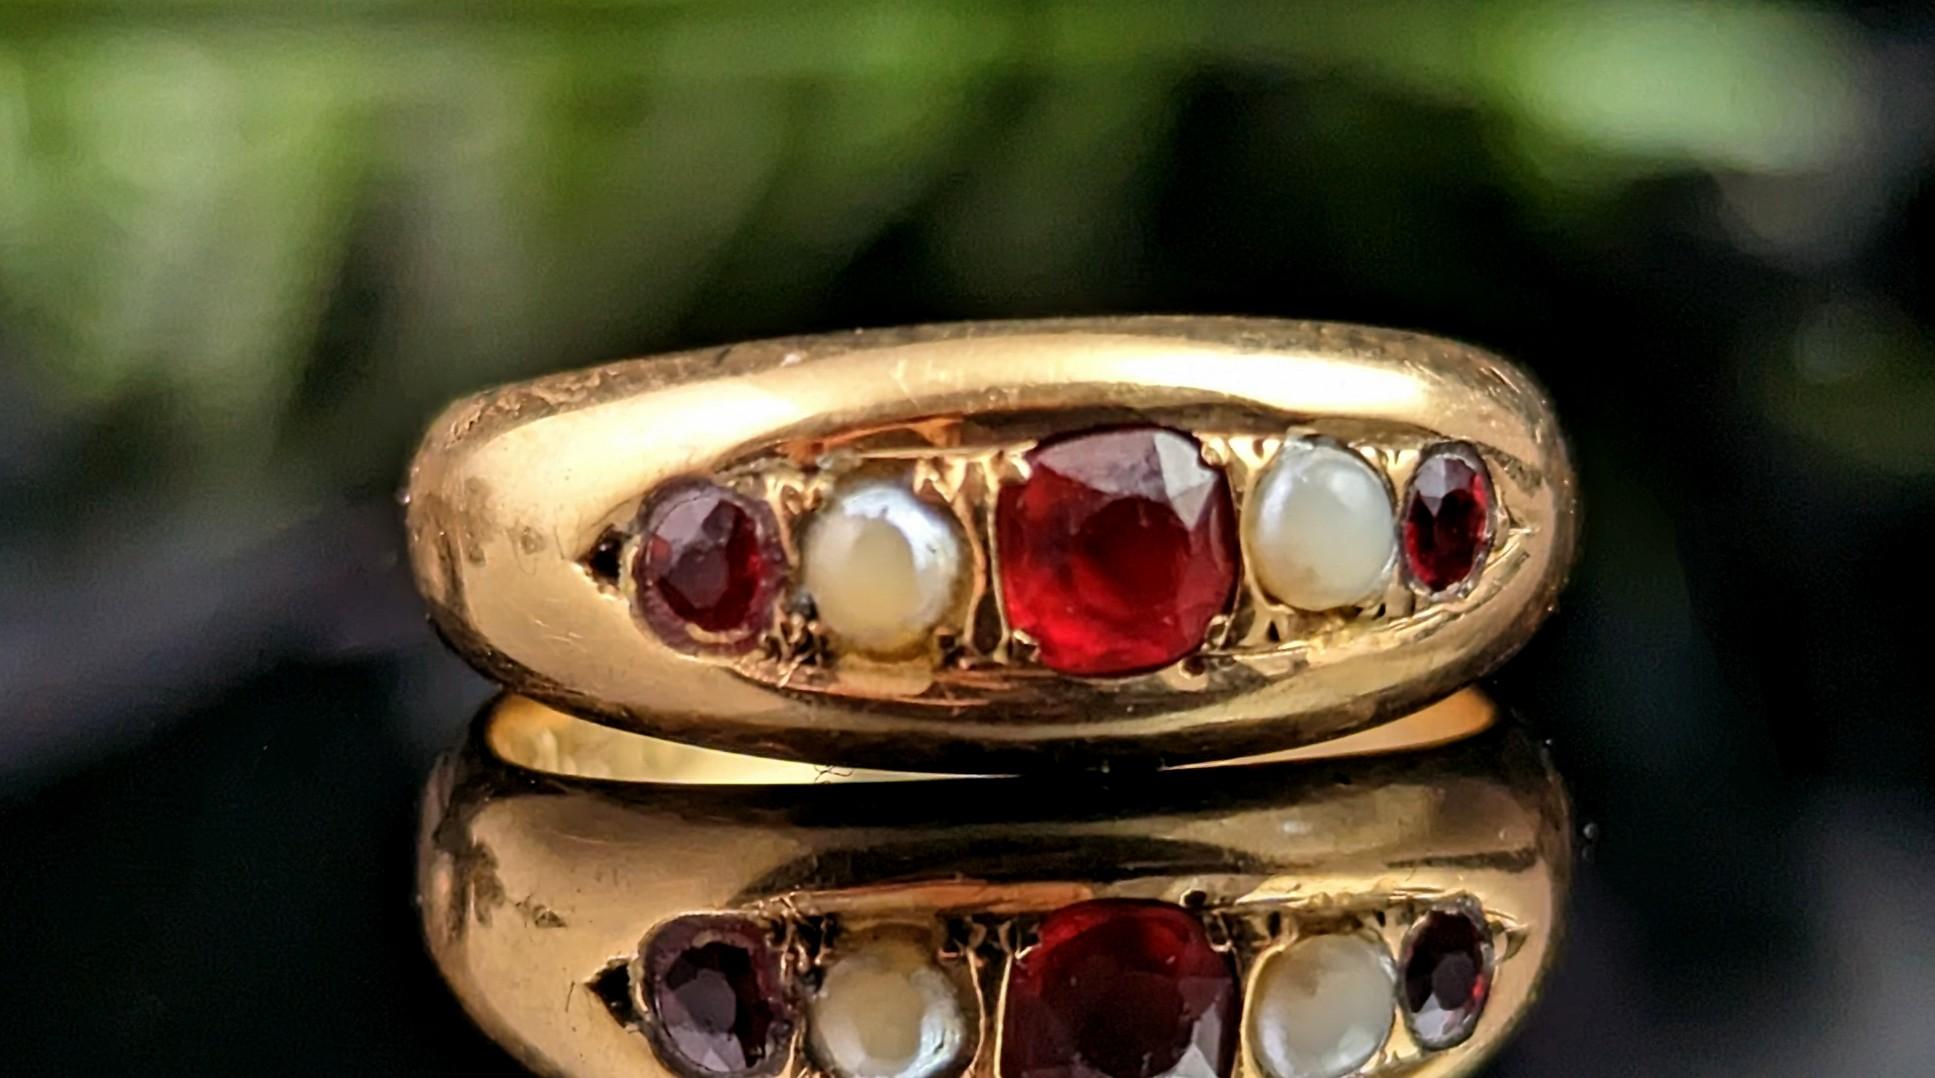 You can't help but admire the lived in charm of this beautiful antique, mid Victorian era, Gypsy set ring in 18kt yellow gold.

One of our favourite styles here at StolenAttic and a firm customer favourite.

This beautiful ring is a five stone,